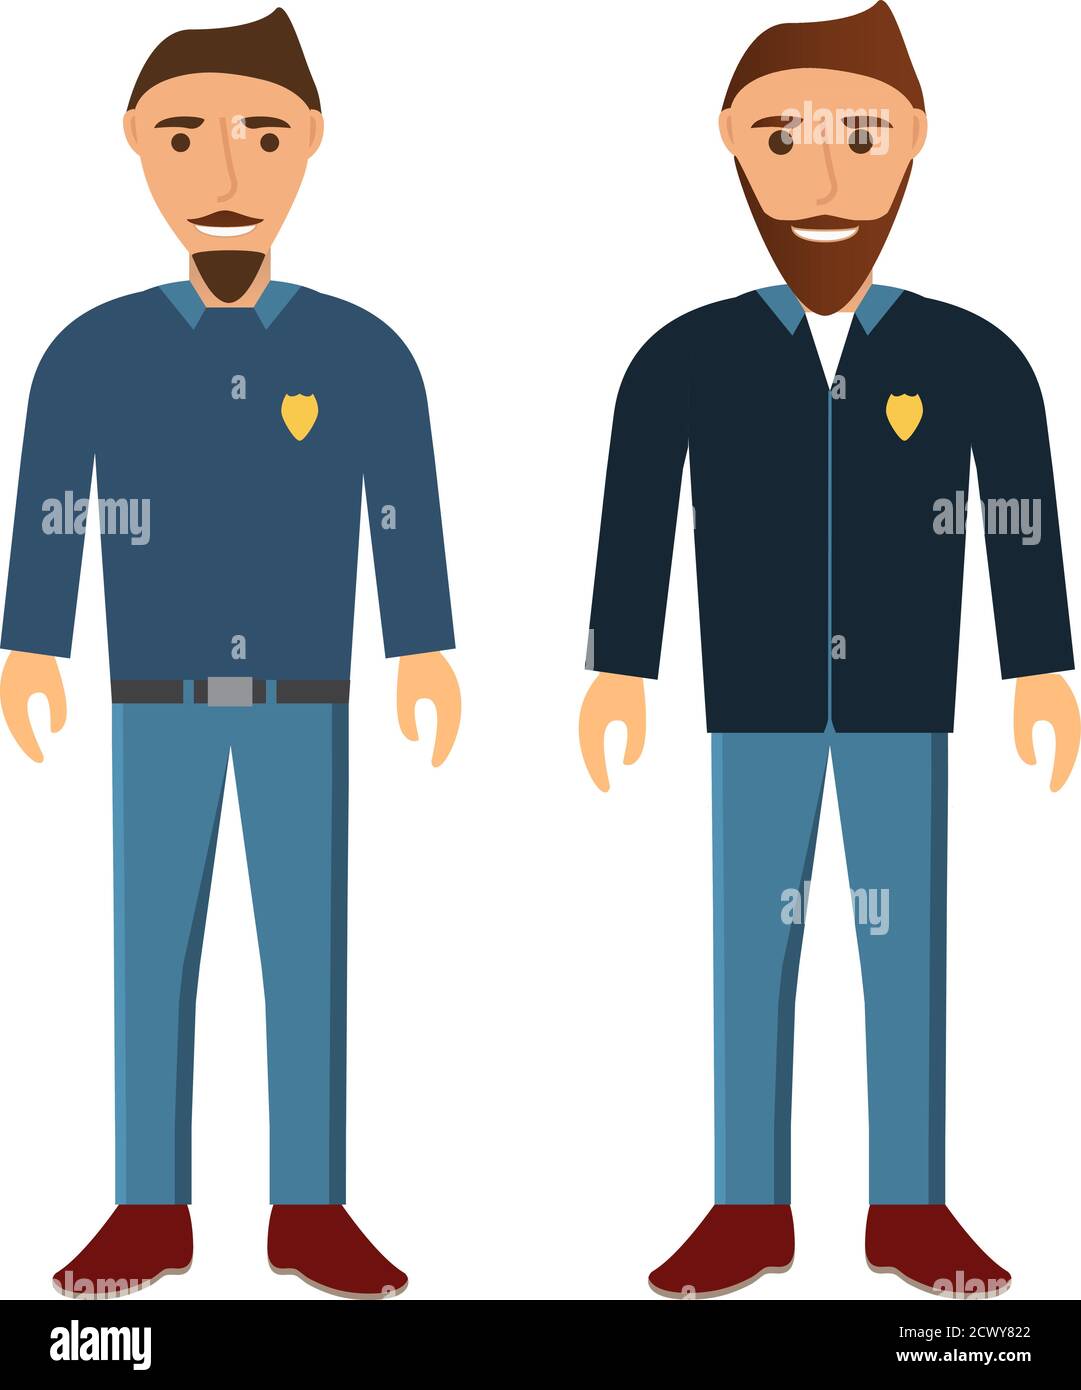 Group of young people with a beard and moustaches. The men working in police. Stock Vector